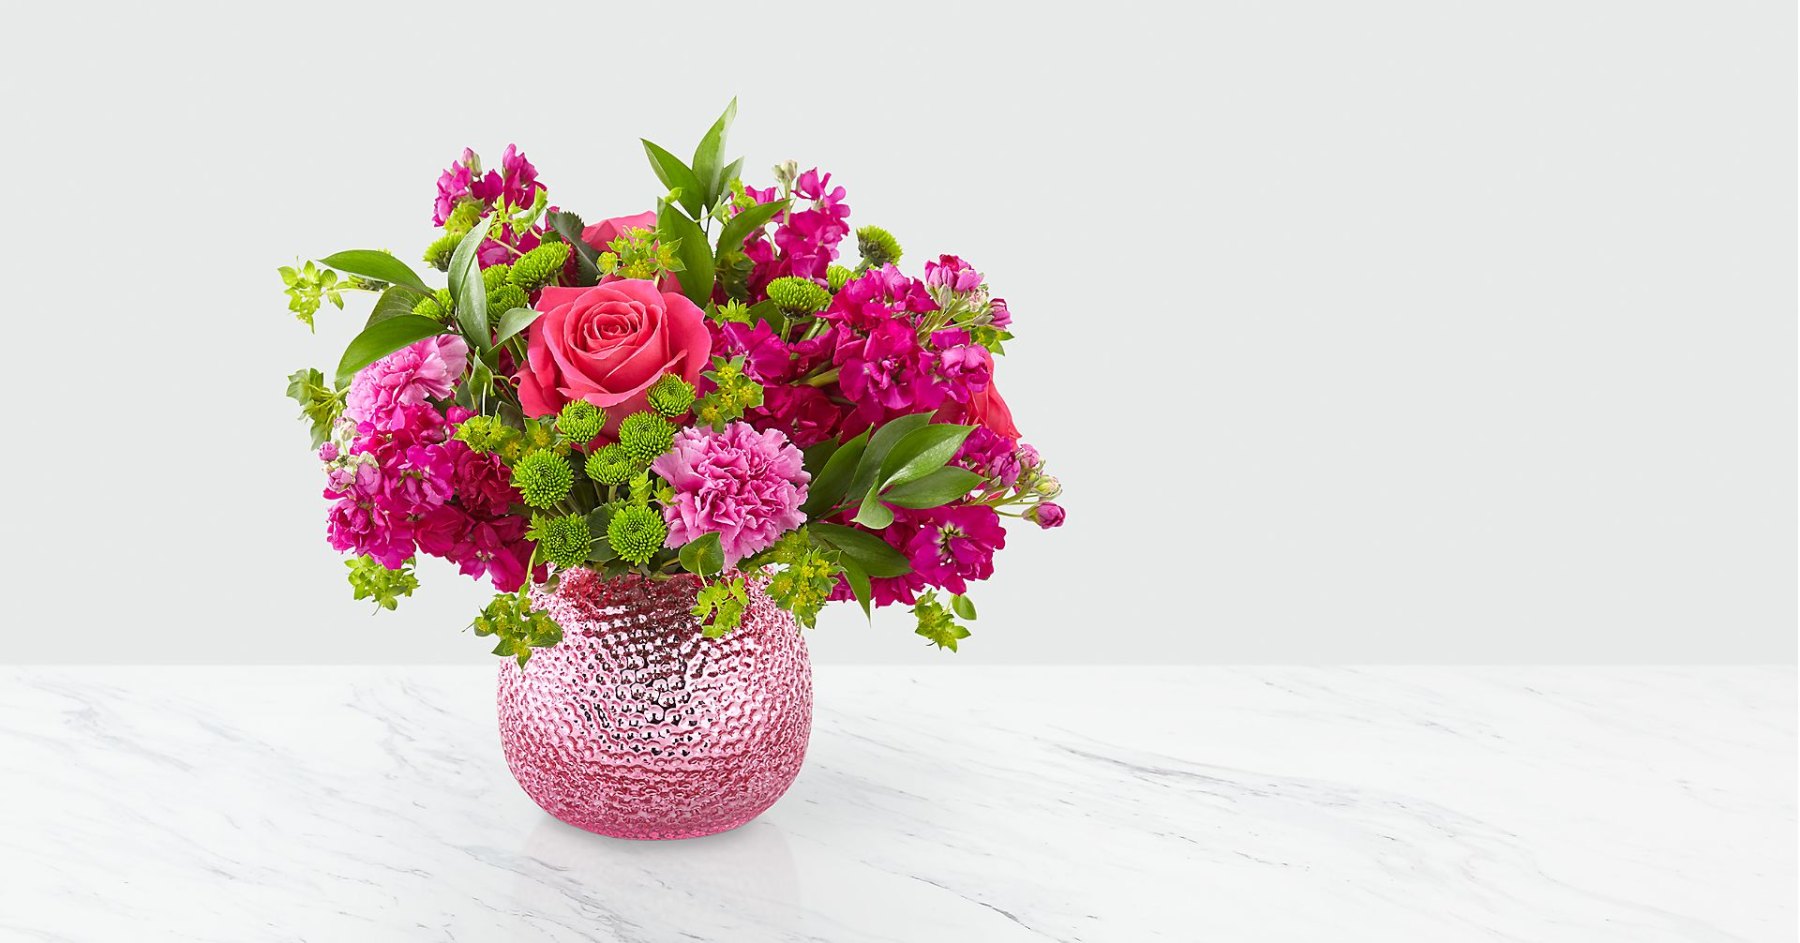 Mother’s Day Flower Bouquets From FTD Available to Order Now UsWeekly